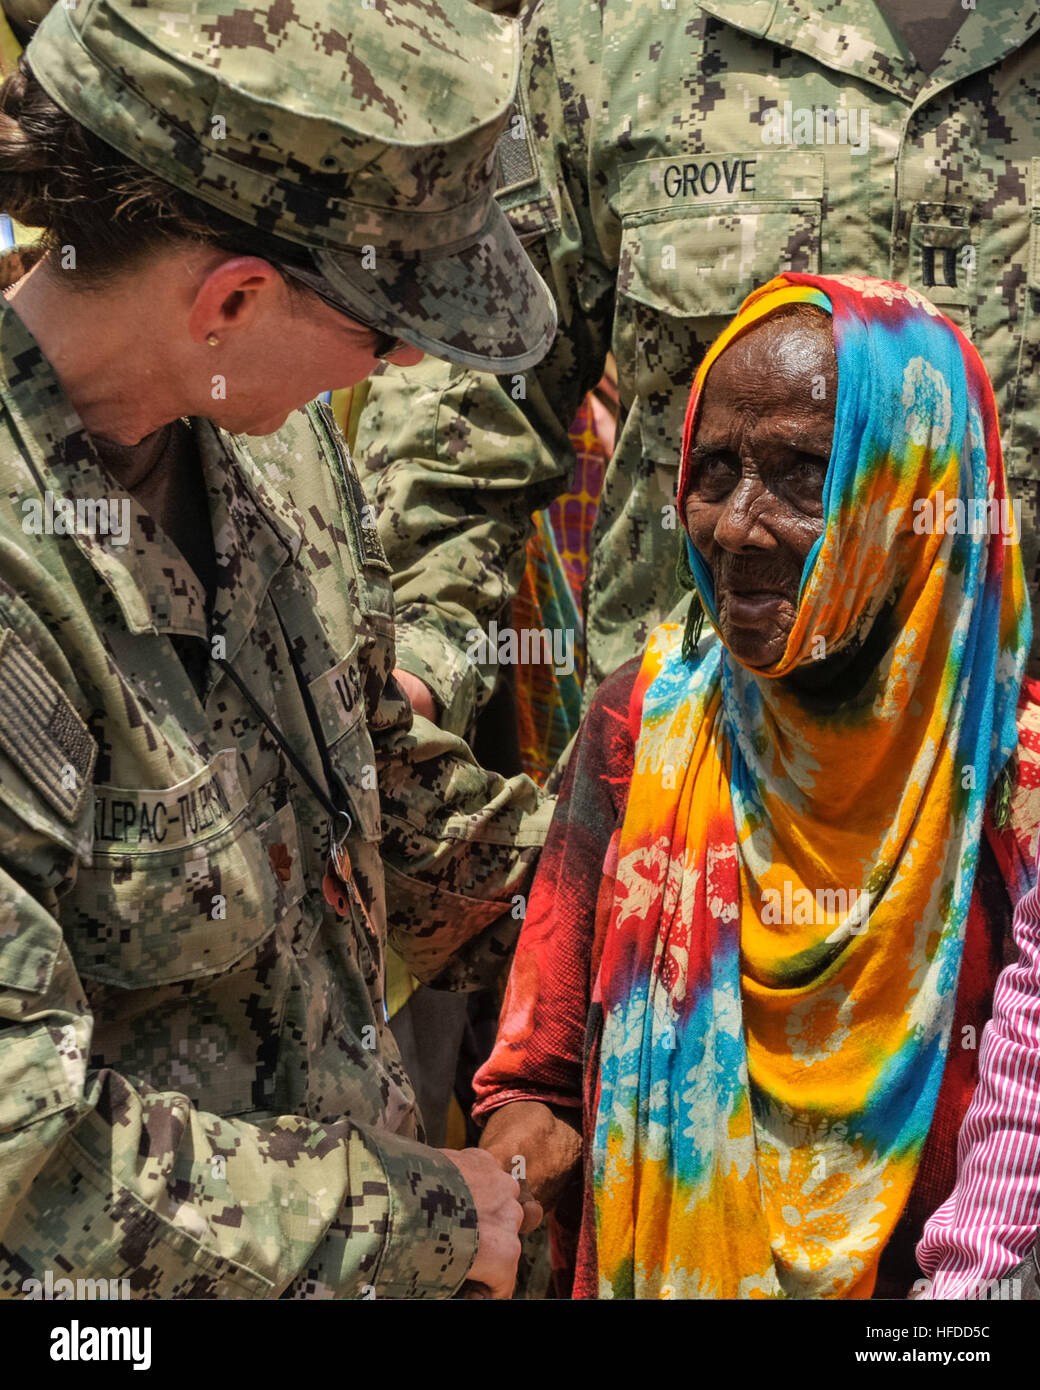 U.S. Navy Lt. Cmdr. Pamela Klepac-Tulensru, left, the officer in charge of the expeditionary medical facility at Camp Lemonnier, Djibouti, exchanges greetings with a Djiboutian woman at the home of a community leader in Djibouti city April 9, 2014. U.S. Service members assigned to Camp Lemonnier distributed donated mattresses, clothing and other necessities to area families displaced by a fire. (U.S. Navy photo by Mass Communication Specialist 1st Class Eric Dietrich/Released) U.S. Navy Lt. Cmdr. Pamela Klepac-Tulensru, left, the officer in charge of the expeditionary medical facility at Camp  Stock Photo